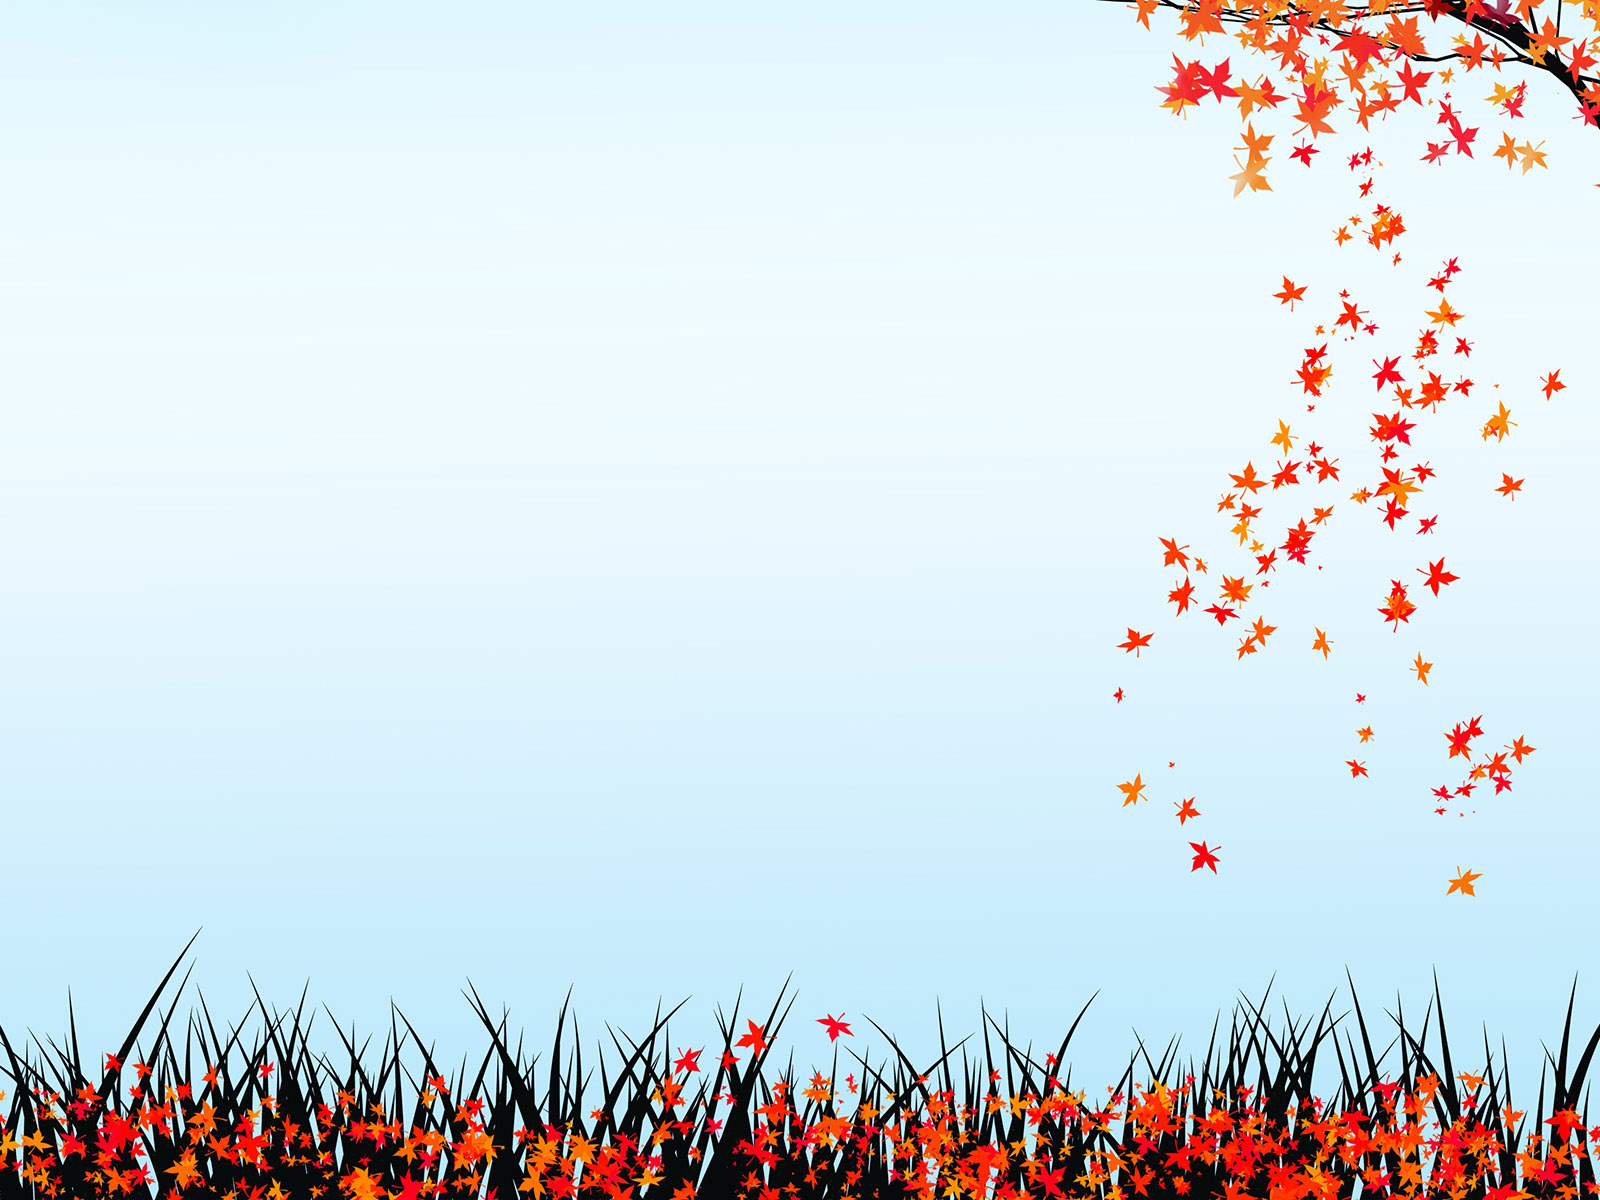 Autumn Nature Backgrounds Holiday, Nature Templates Free PPT Grounds